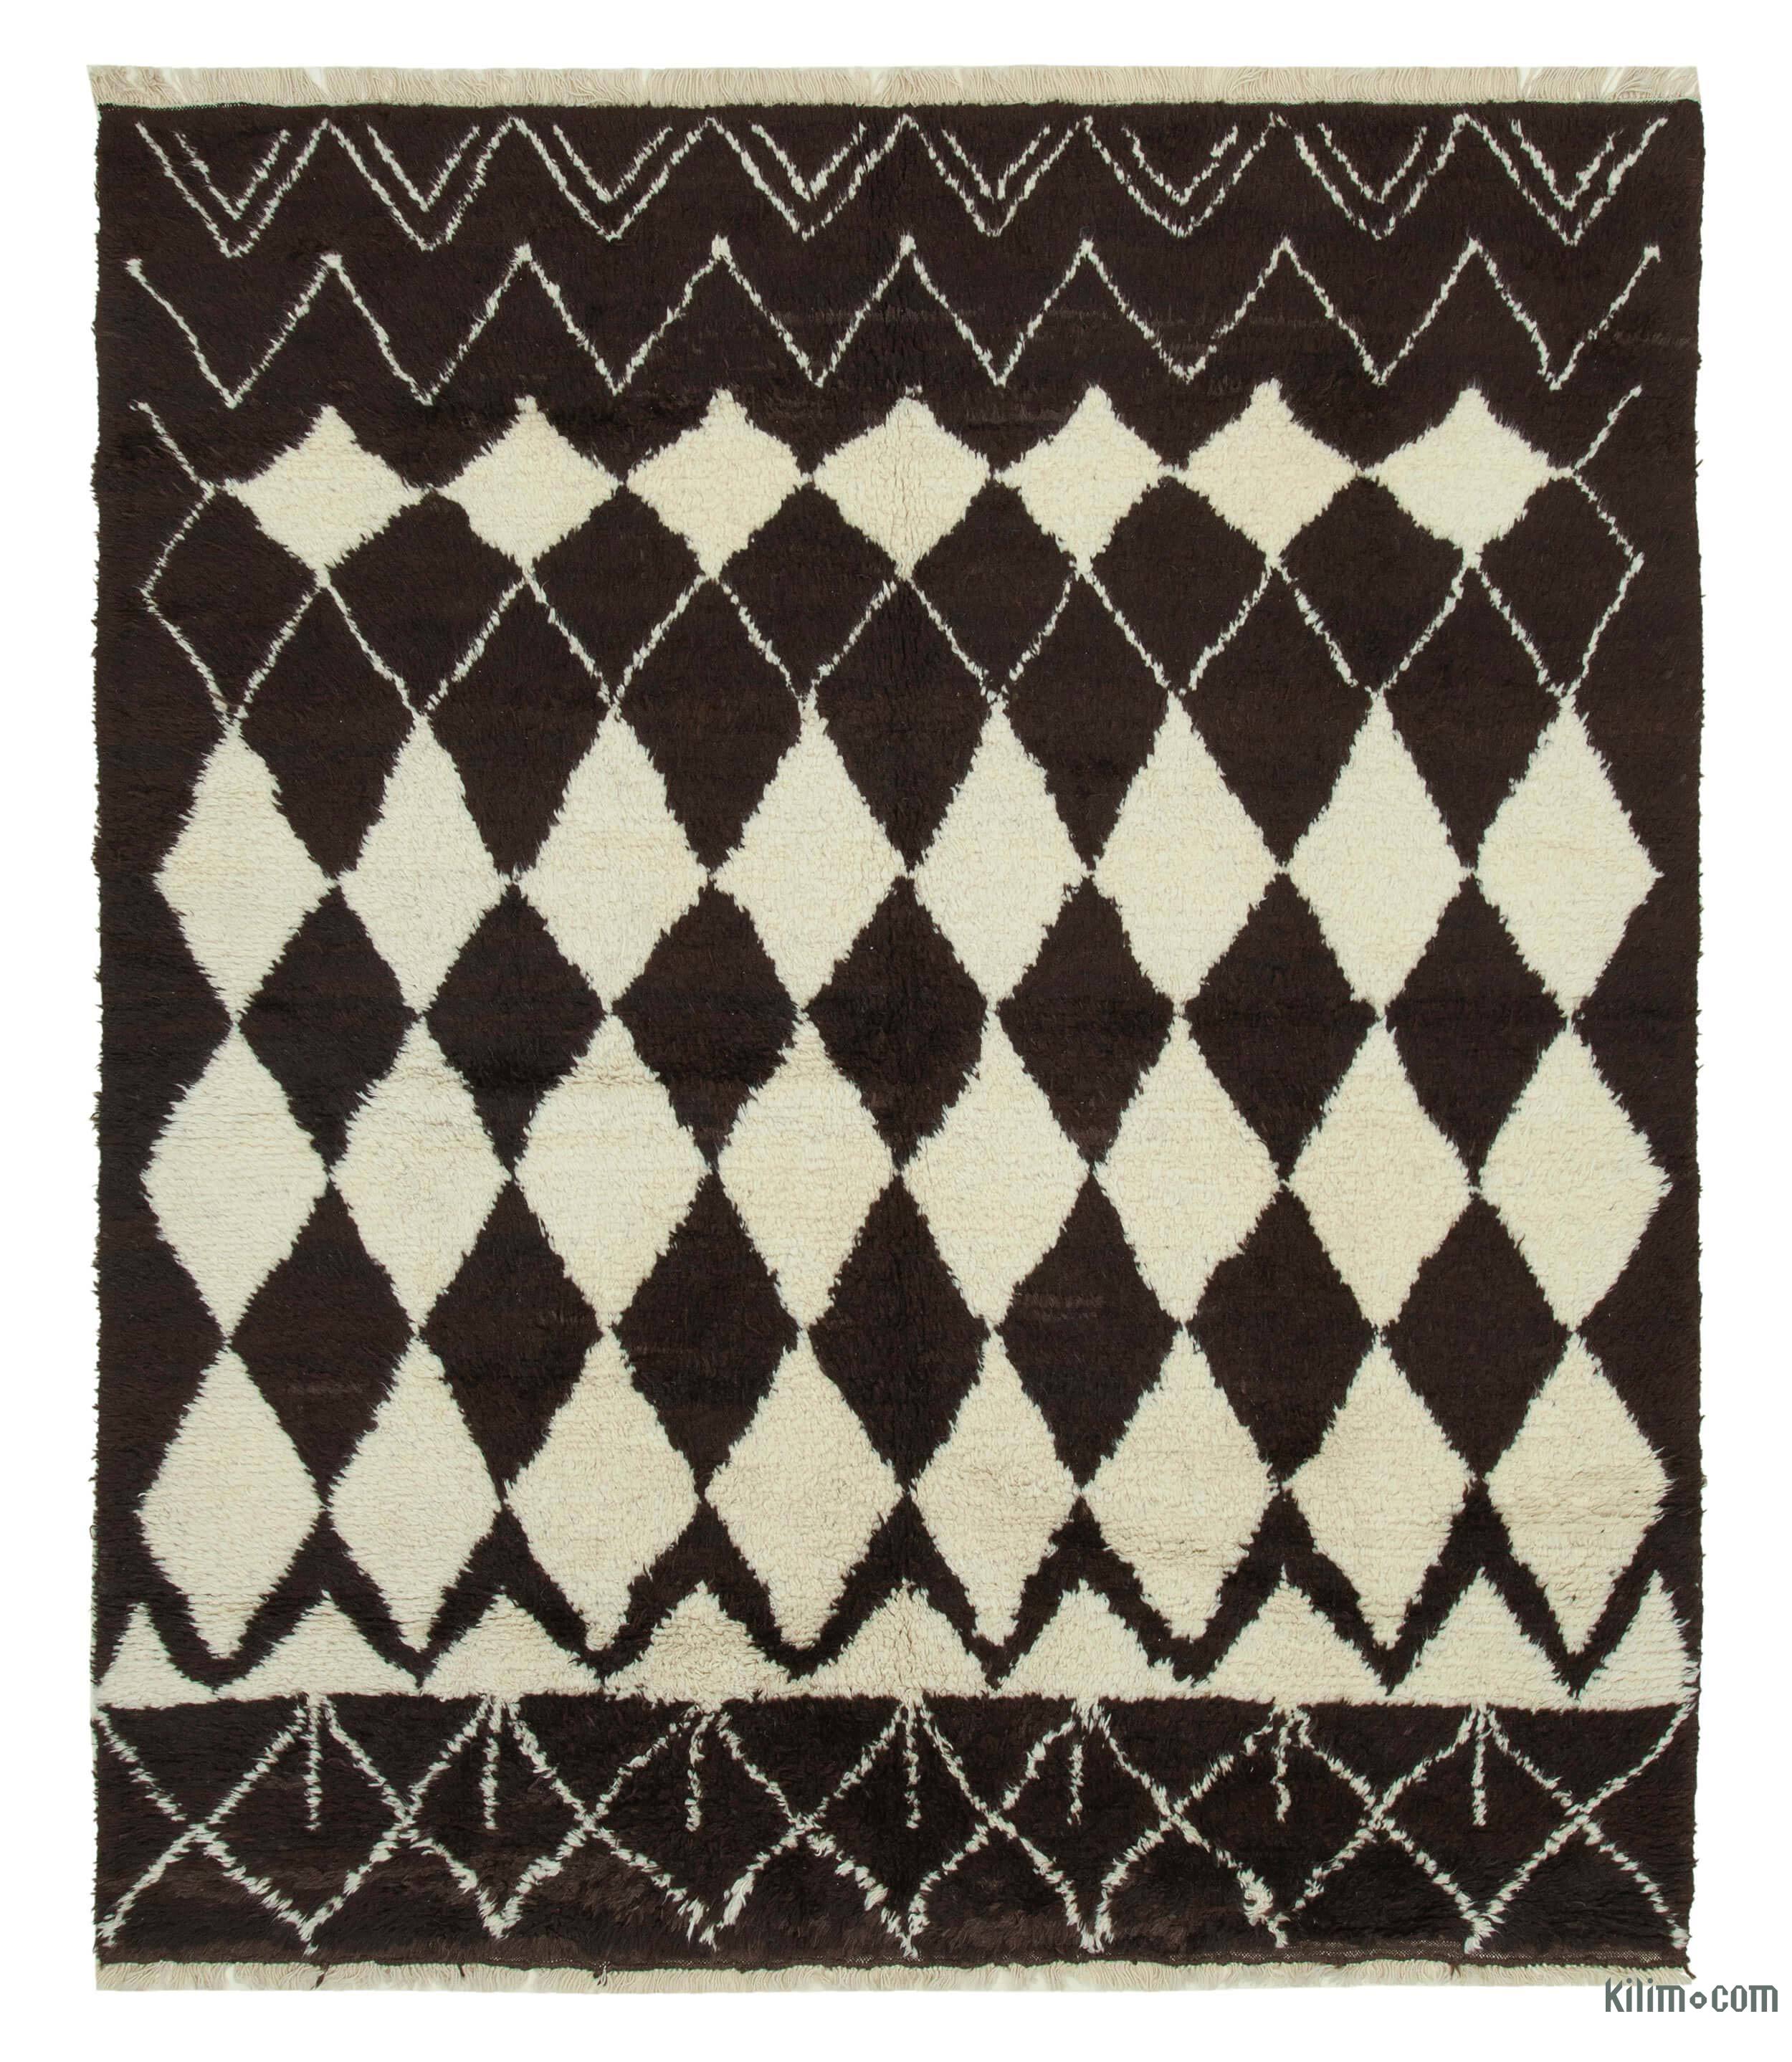 pianist Turbulentie Vliegveld K0039285 Brown, Beige Moroccan Style Hand-Knotted Tulu Rug - 7' 10" x 9' 2"  (94 in. x 110 in.) | The Source for Vintage Rugs, Tribal Kilim Rugs, Wool  Turkish Rugs, Overdyed Persian Rugs,